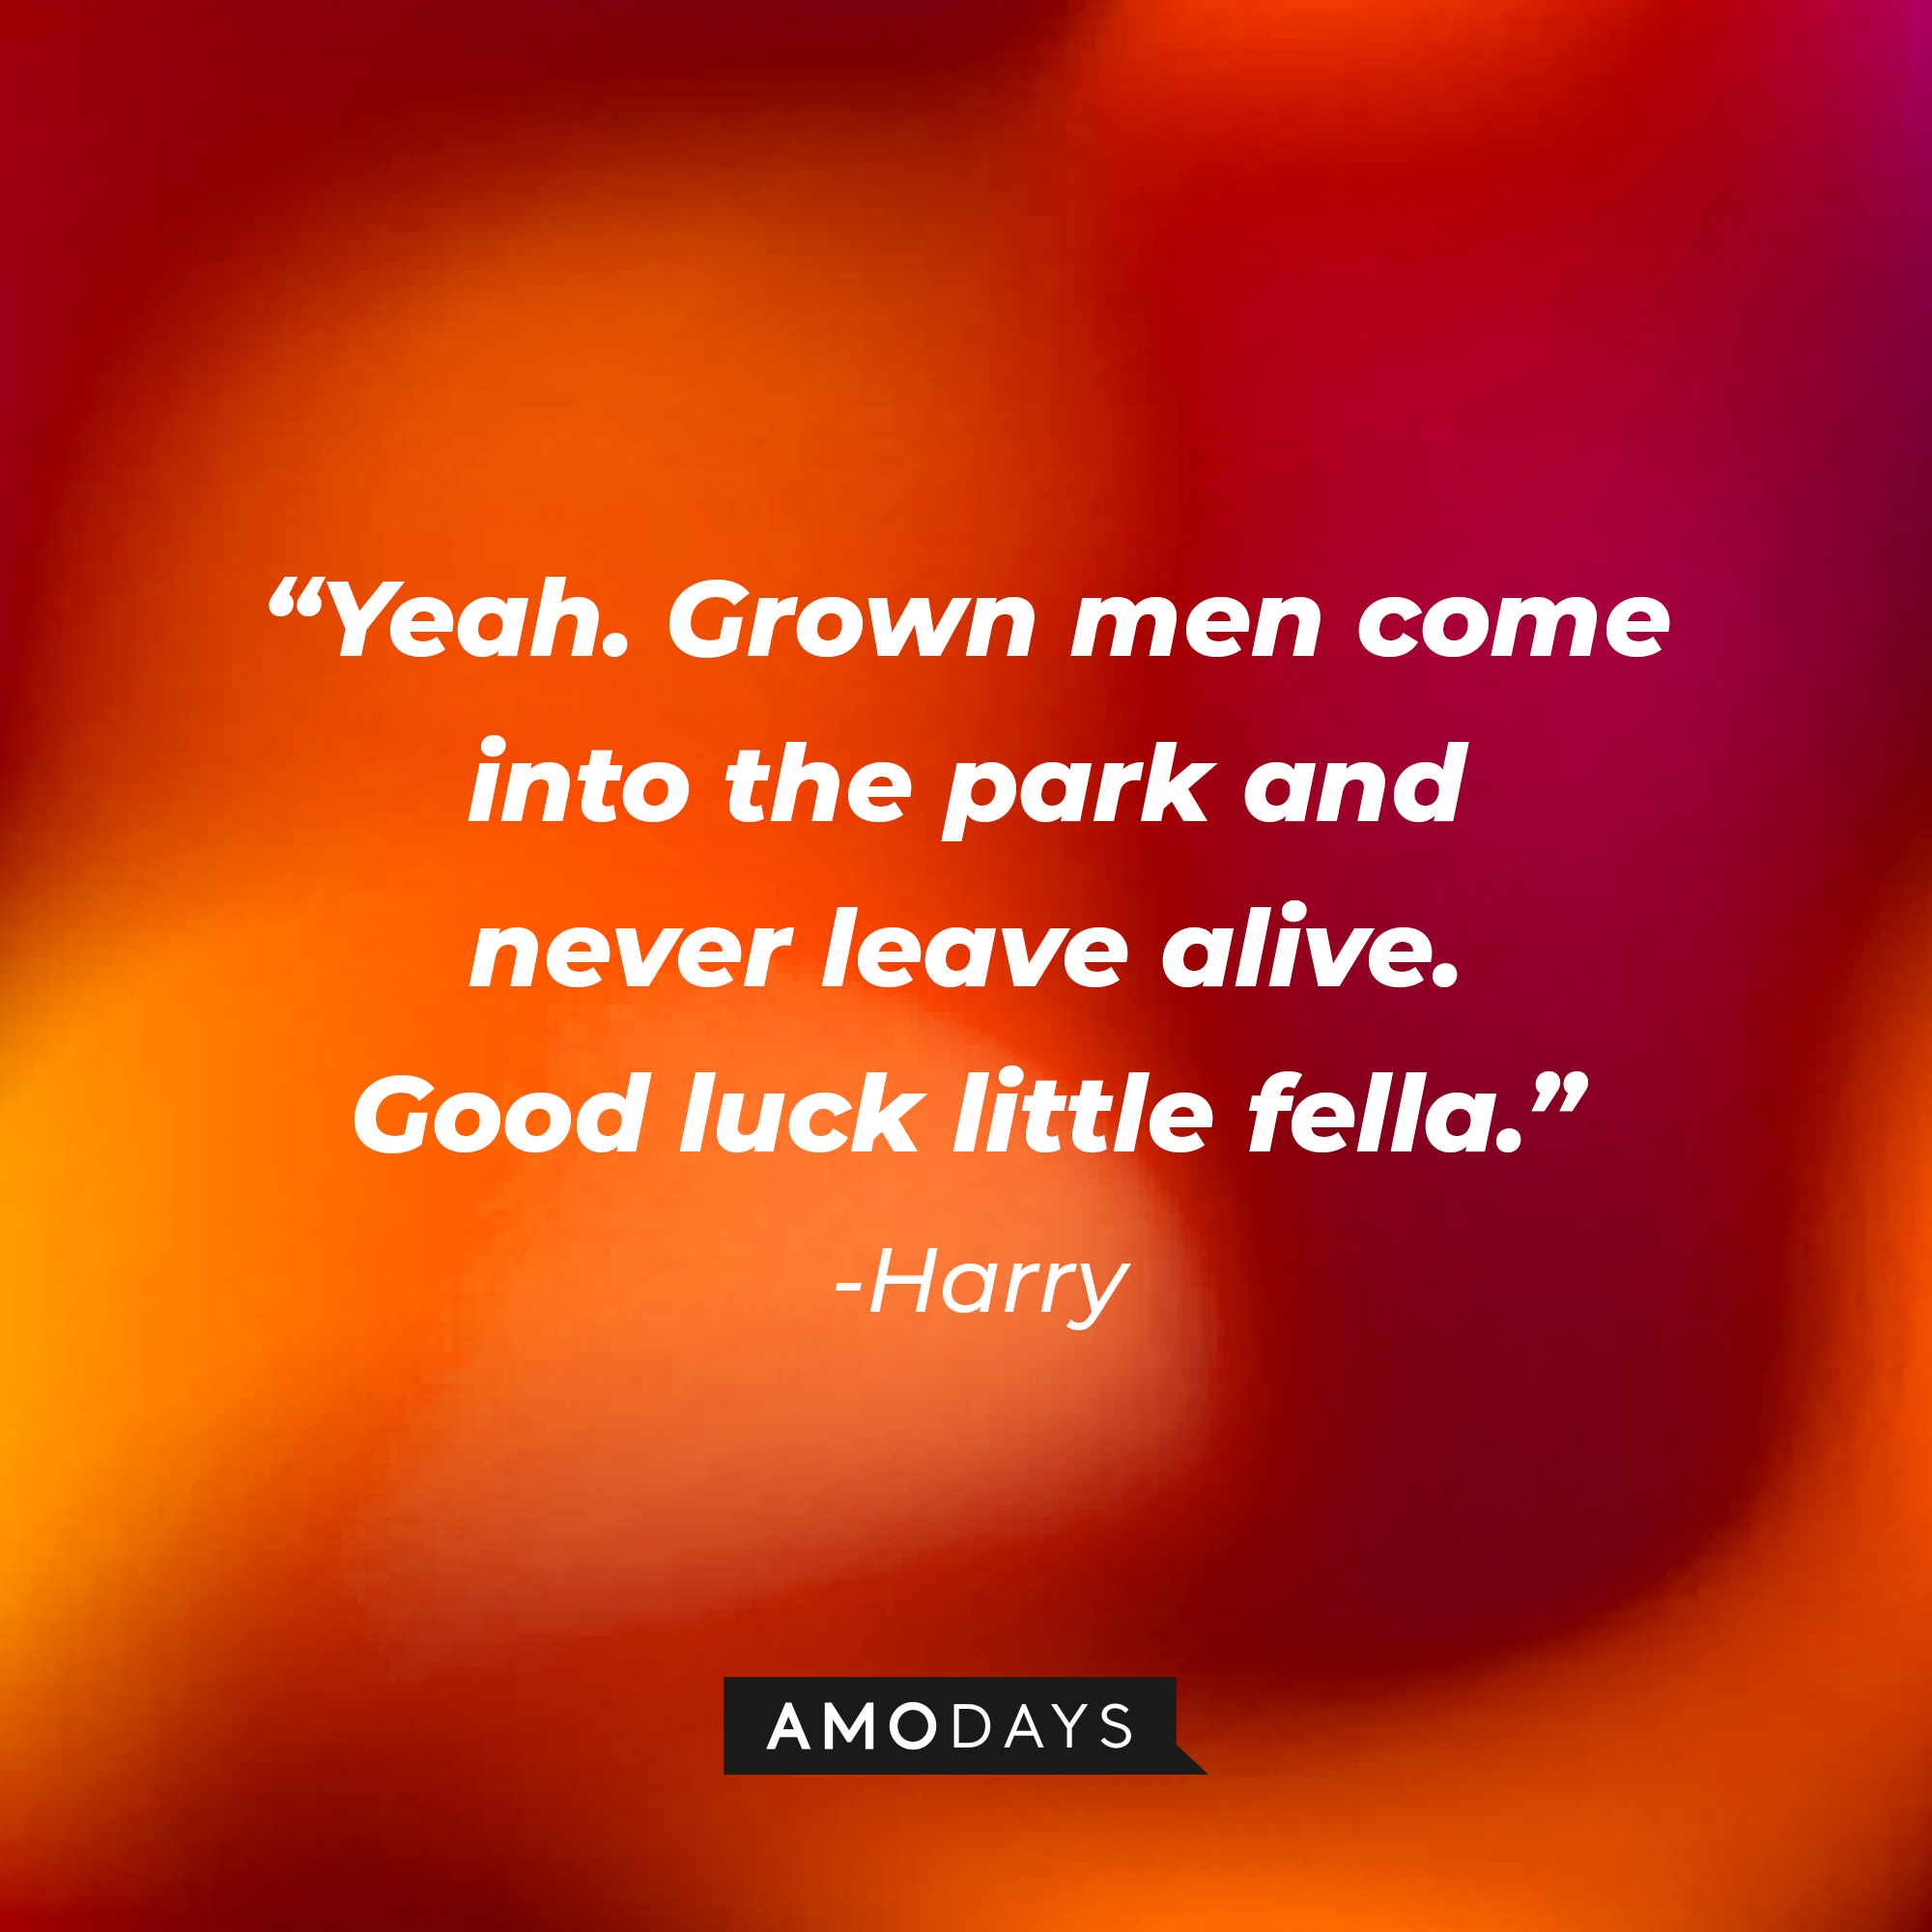 Harry's quote: "Yeah. Grown men come into the park and never leave alive. Good luck little fella." | Source: AmoDays